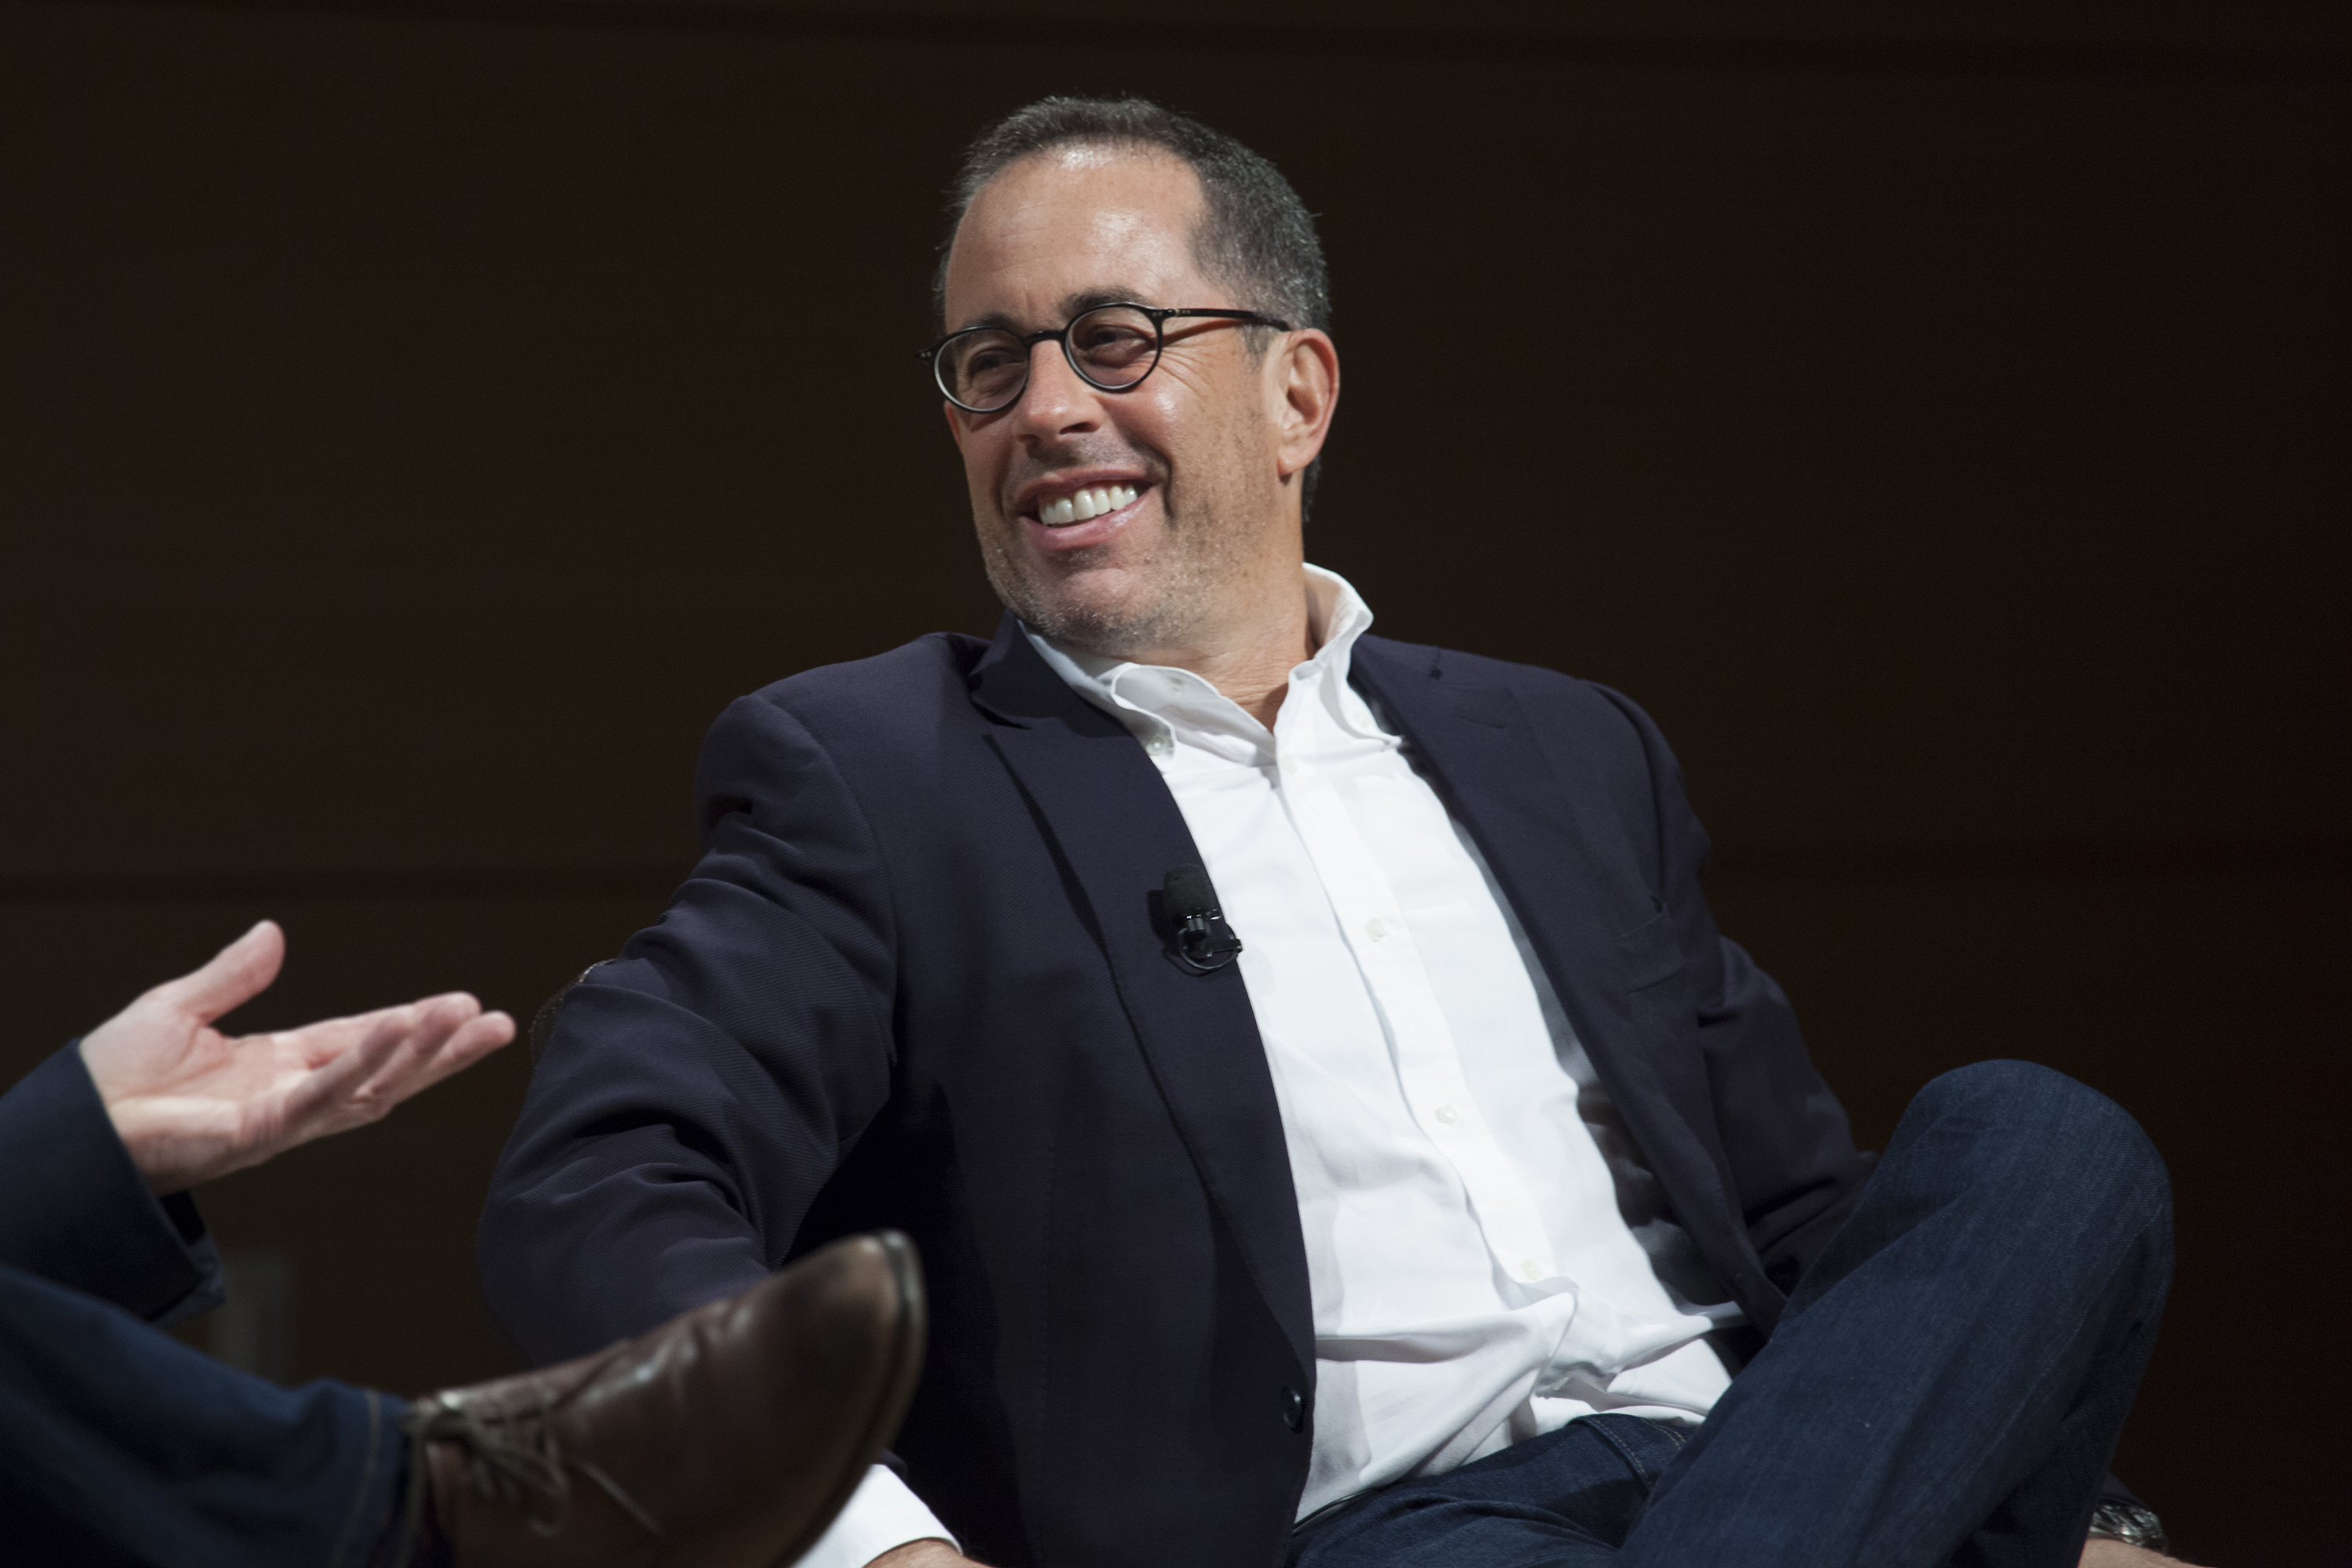 Jerry Seinfeld attends TimesTalks at The New School on December 1, 2016 in New York City. (Santiago Felipe—Getty Images)